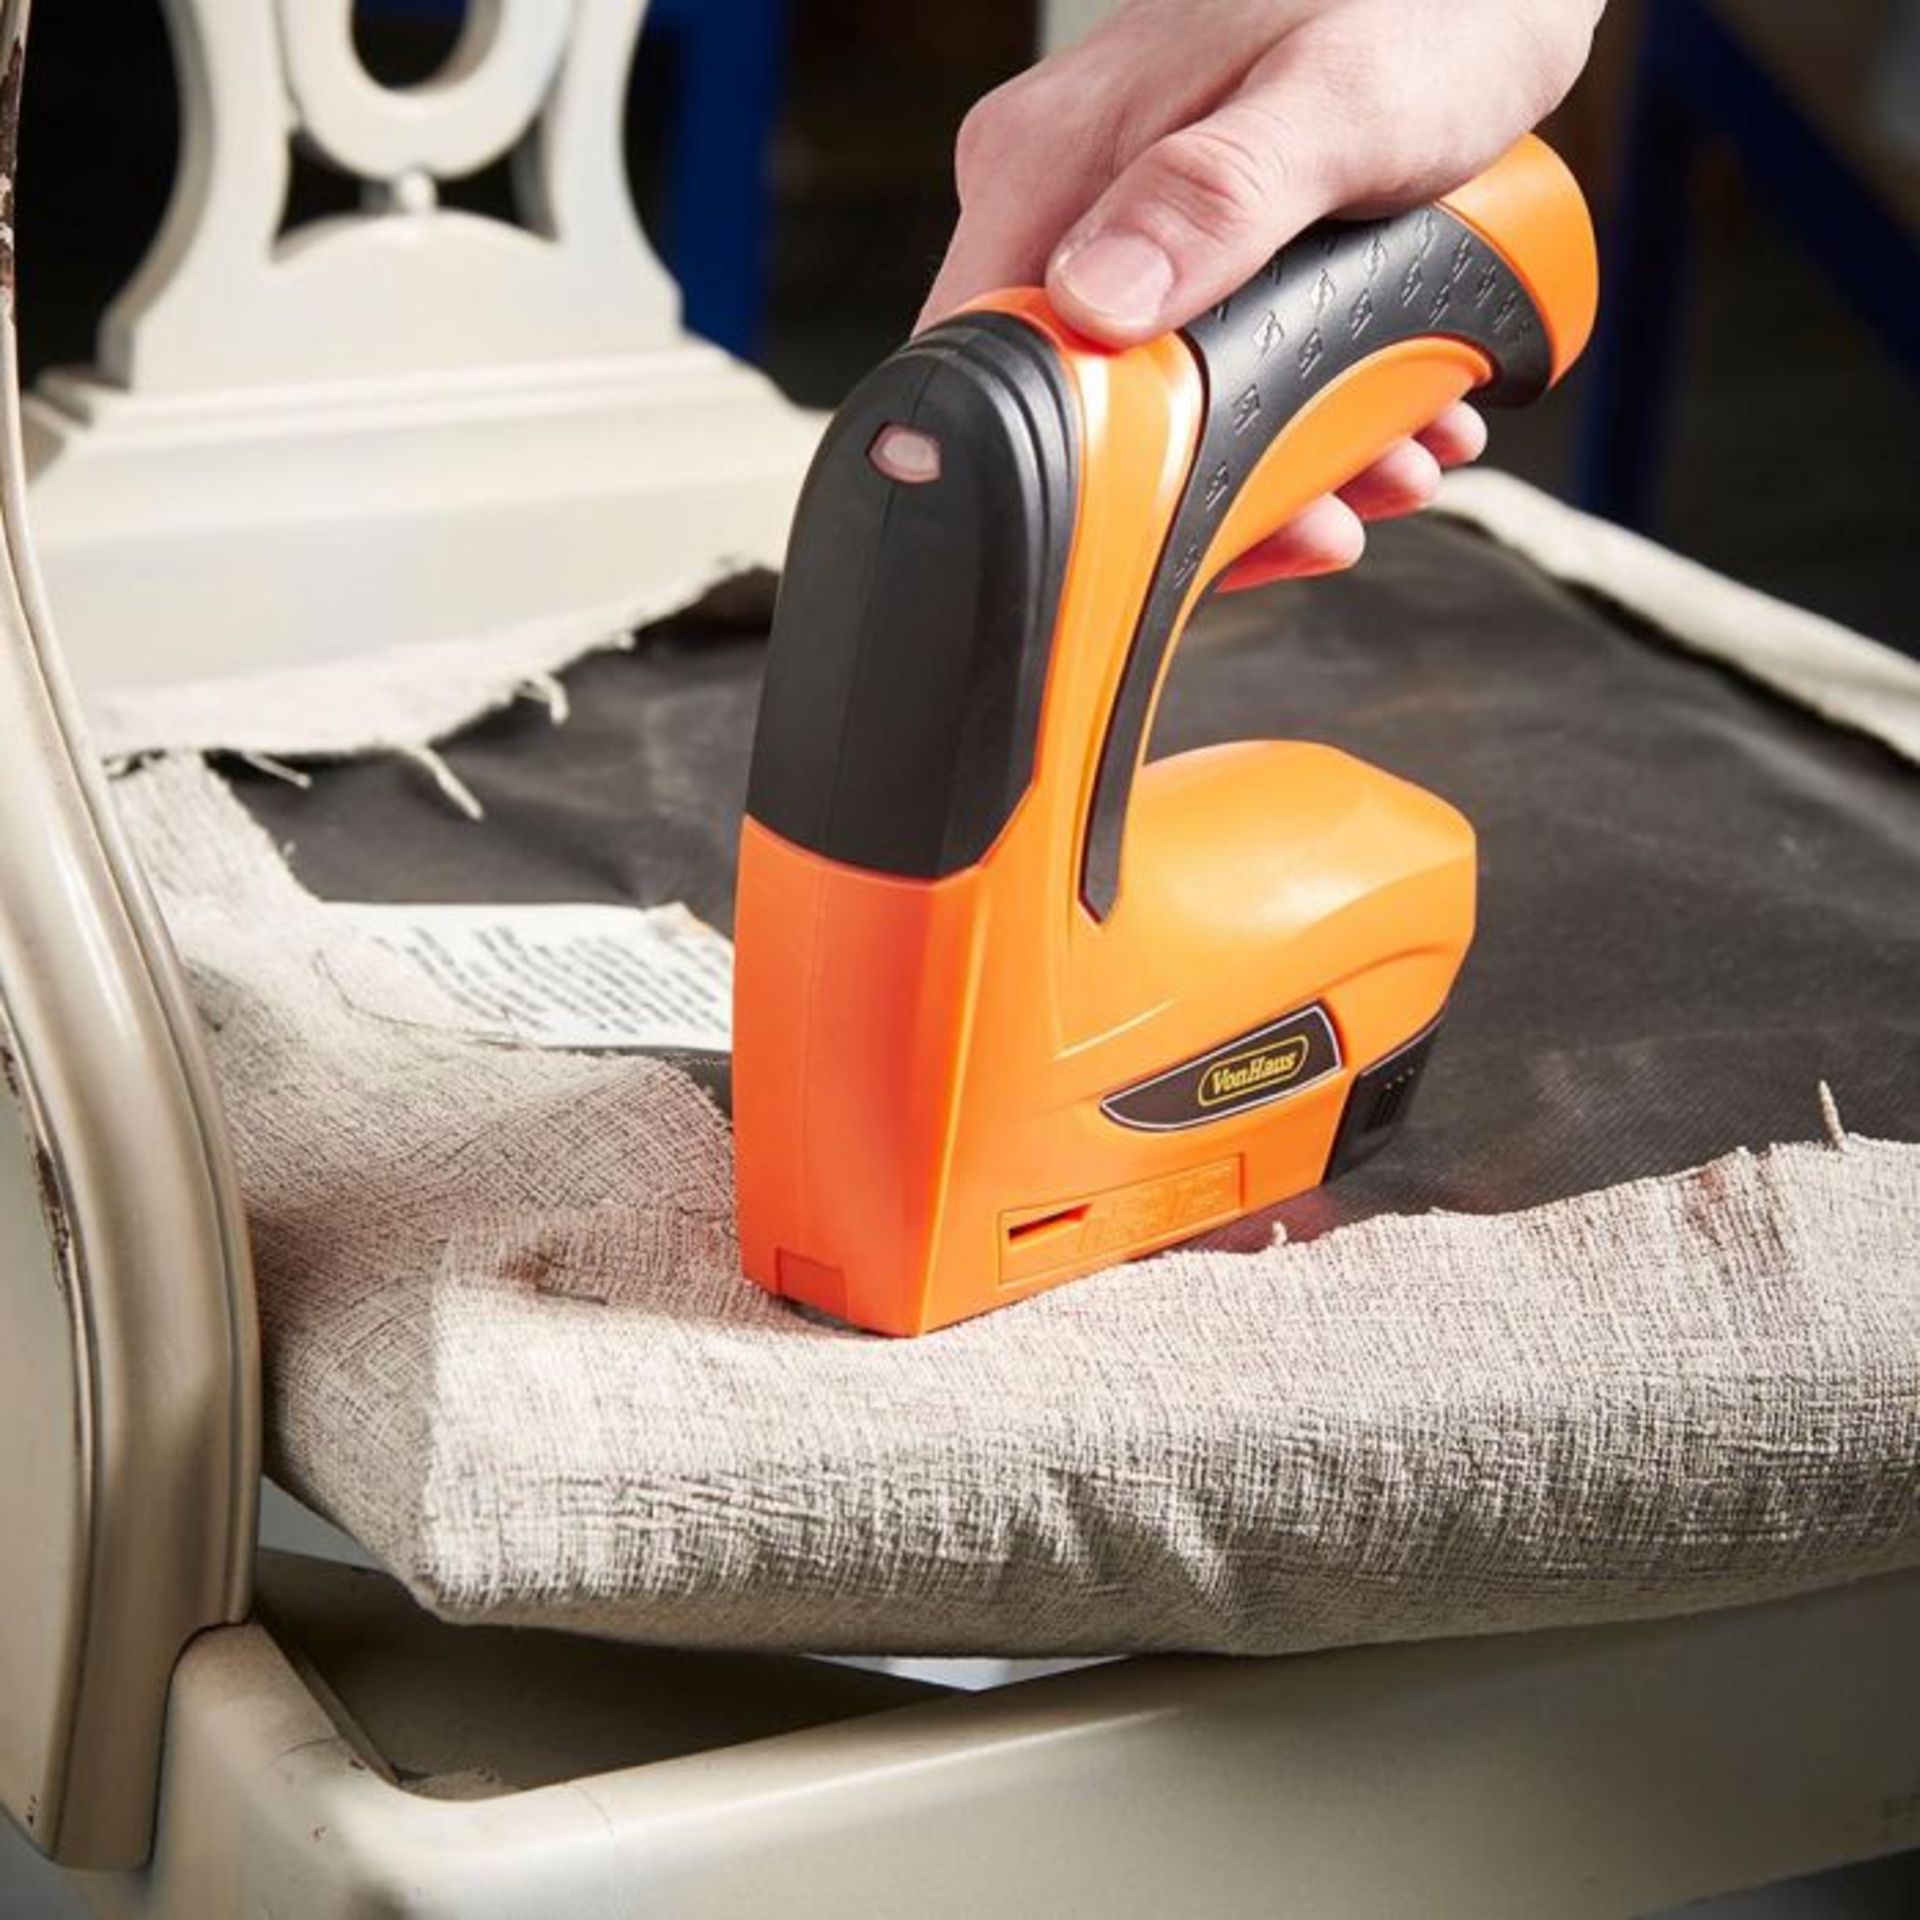 (S450) 3.6V Nailer & Stapler Ideal for crafting and decorating – quickly staple, nail or fa... - Image 4 of 4